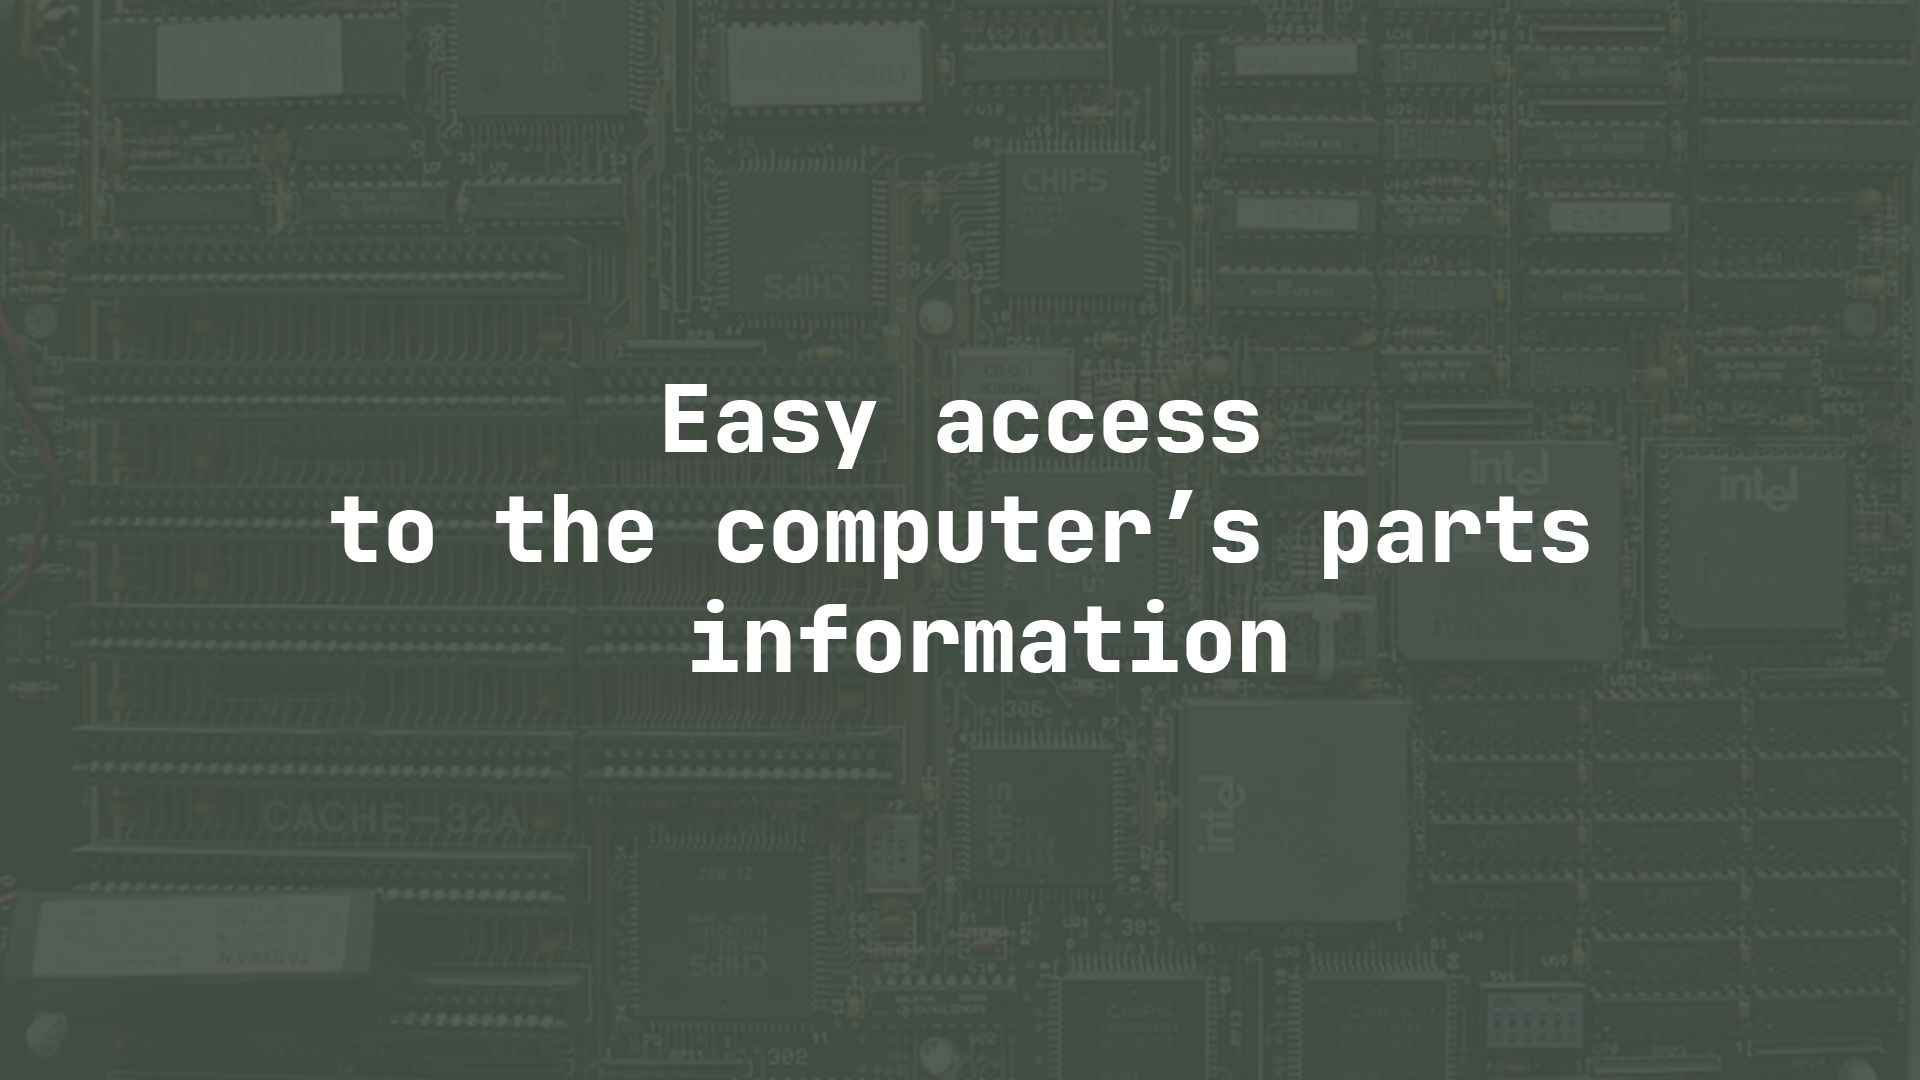 Easy Access to the computer's parts information